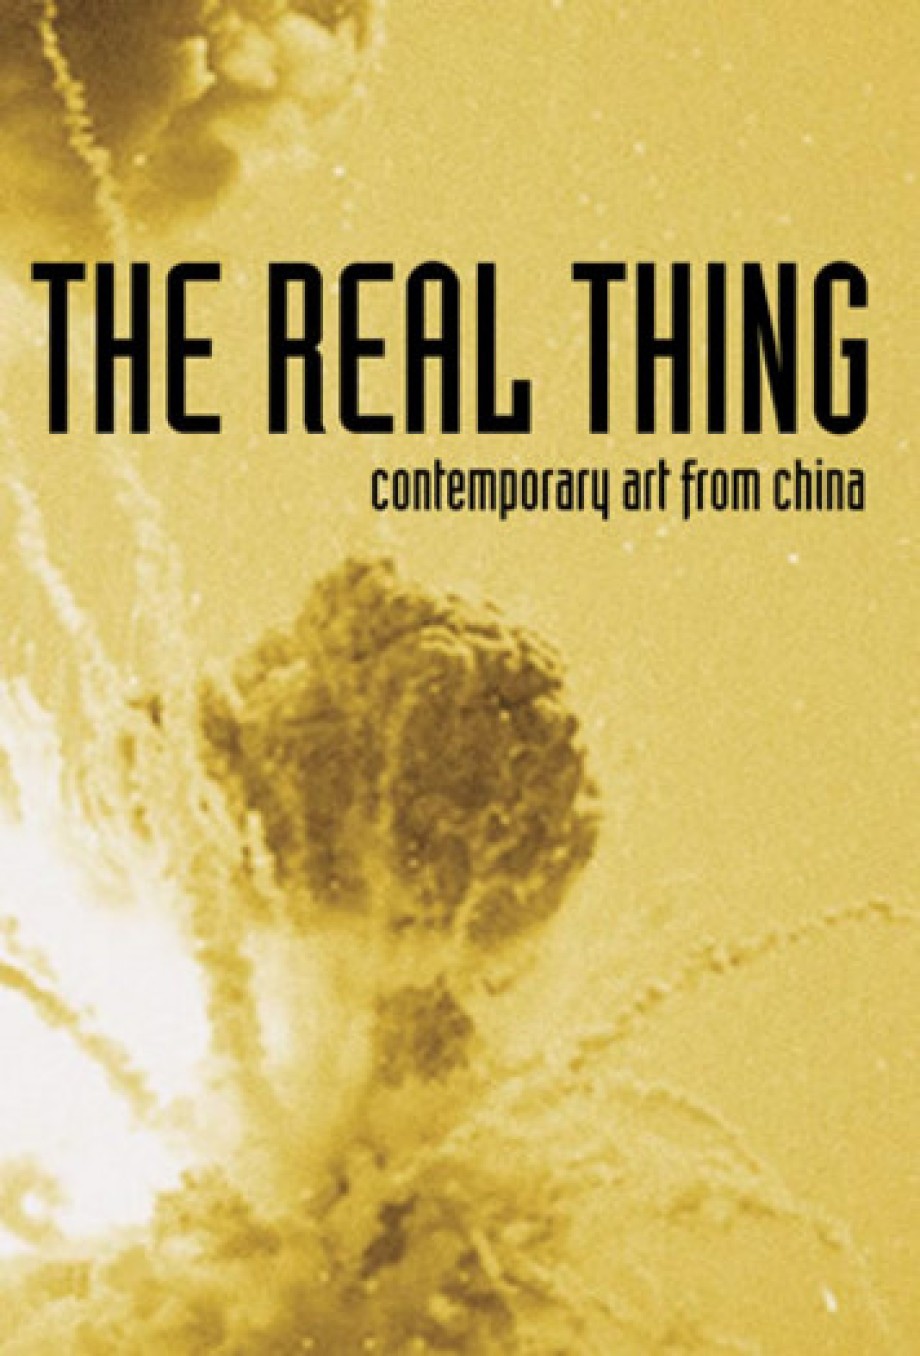 Real Thing Contemporary Art from China